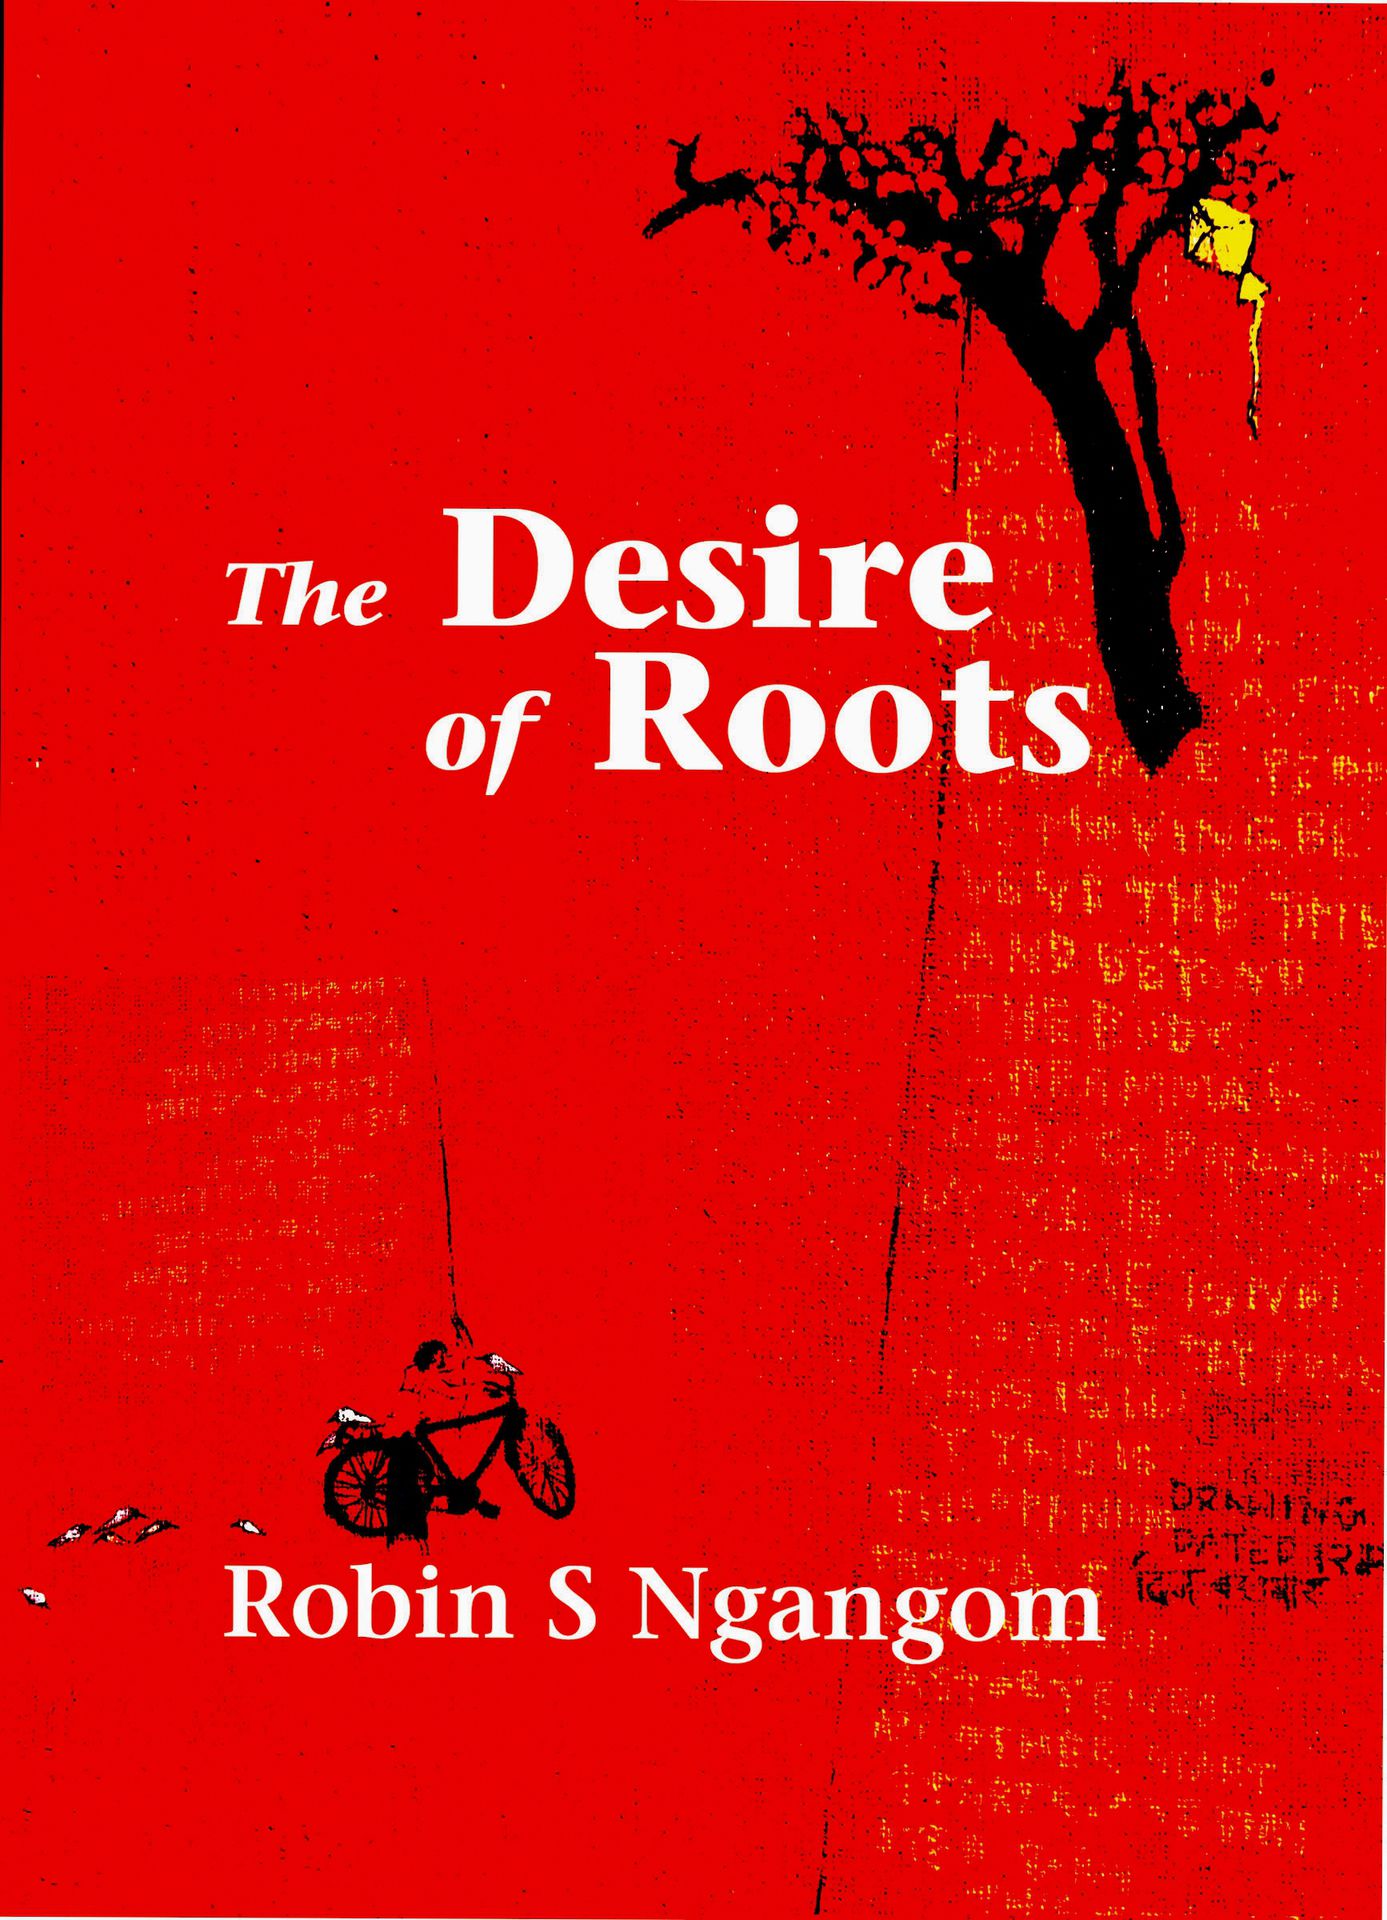 The Desire of Roots